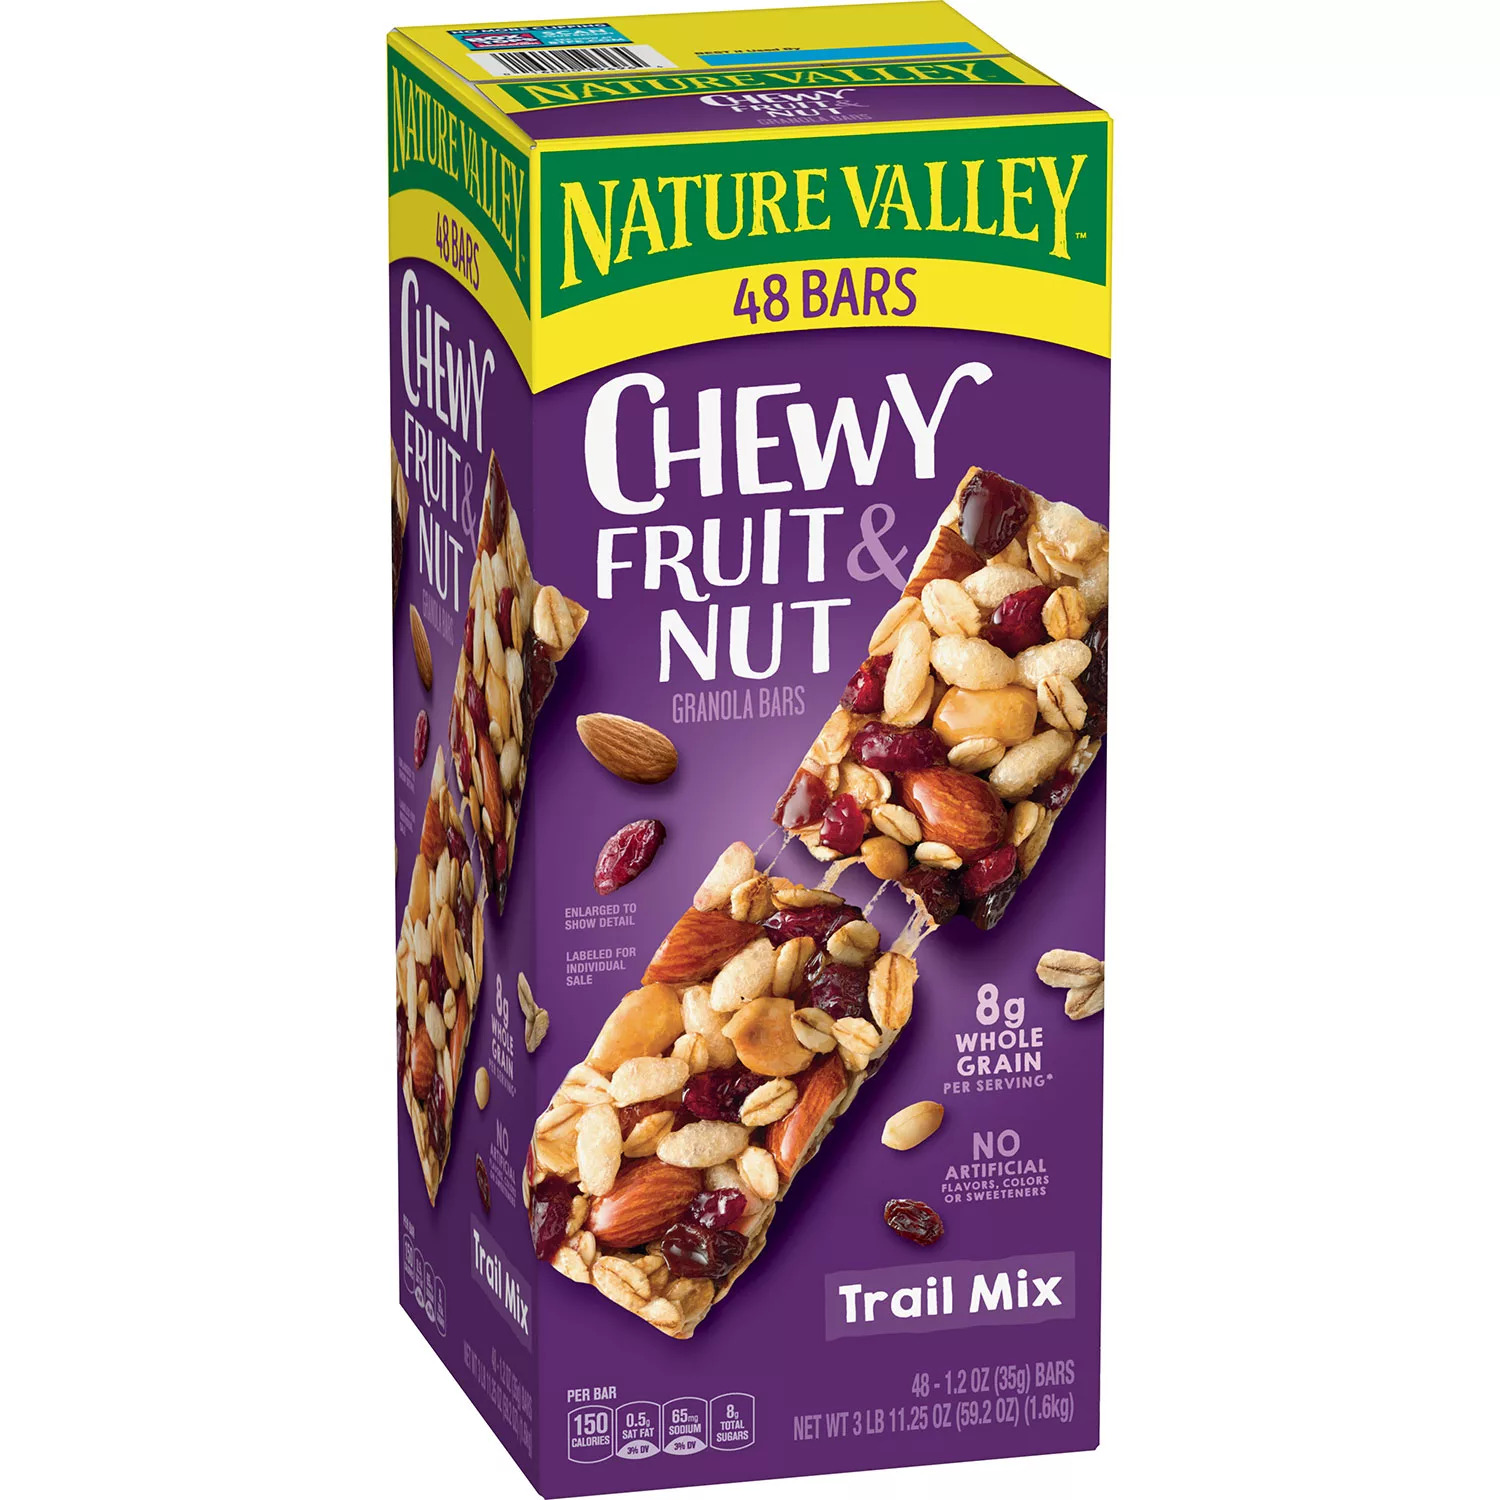 Nature Valley Chewy Trail Mix Fruit & Nut Granola Bars (48 Ct.) Free-shipping